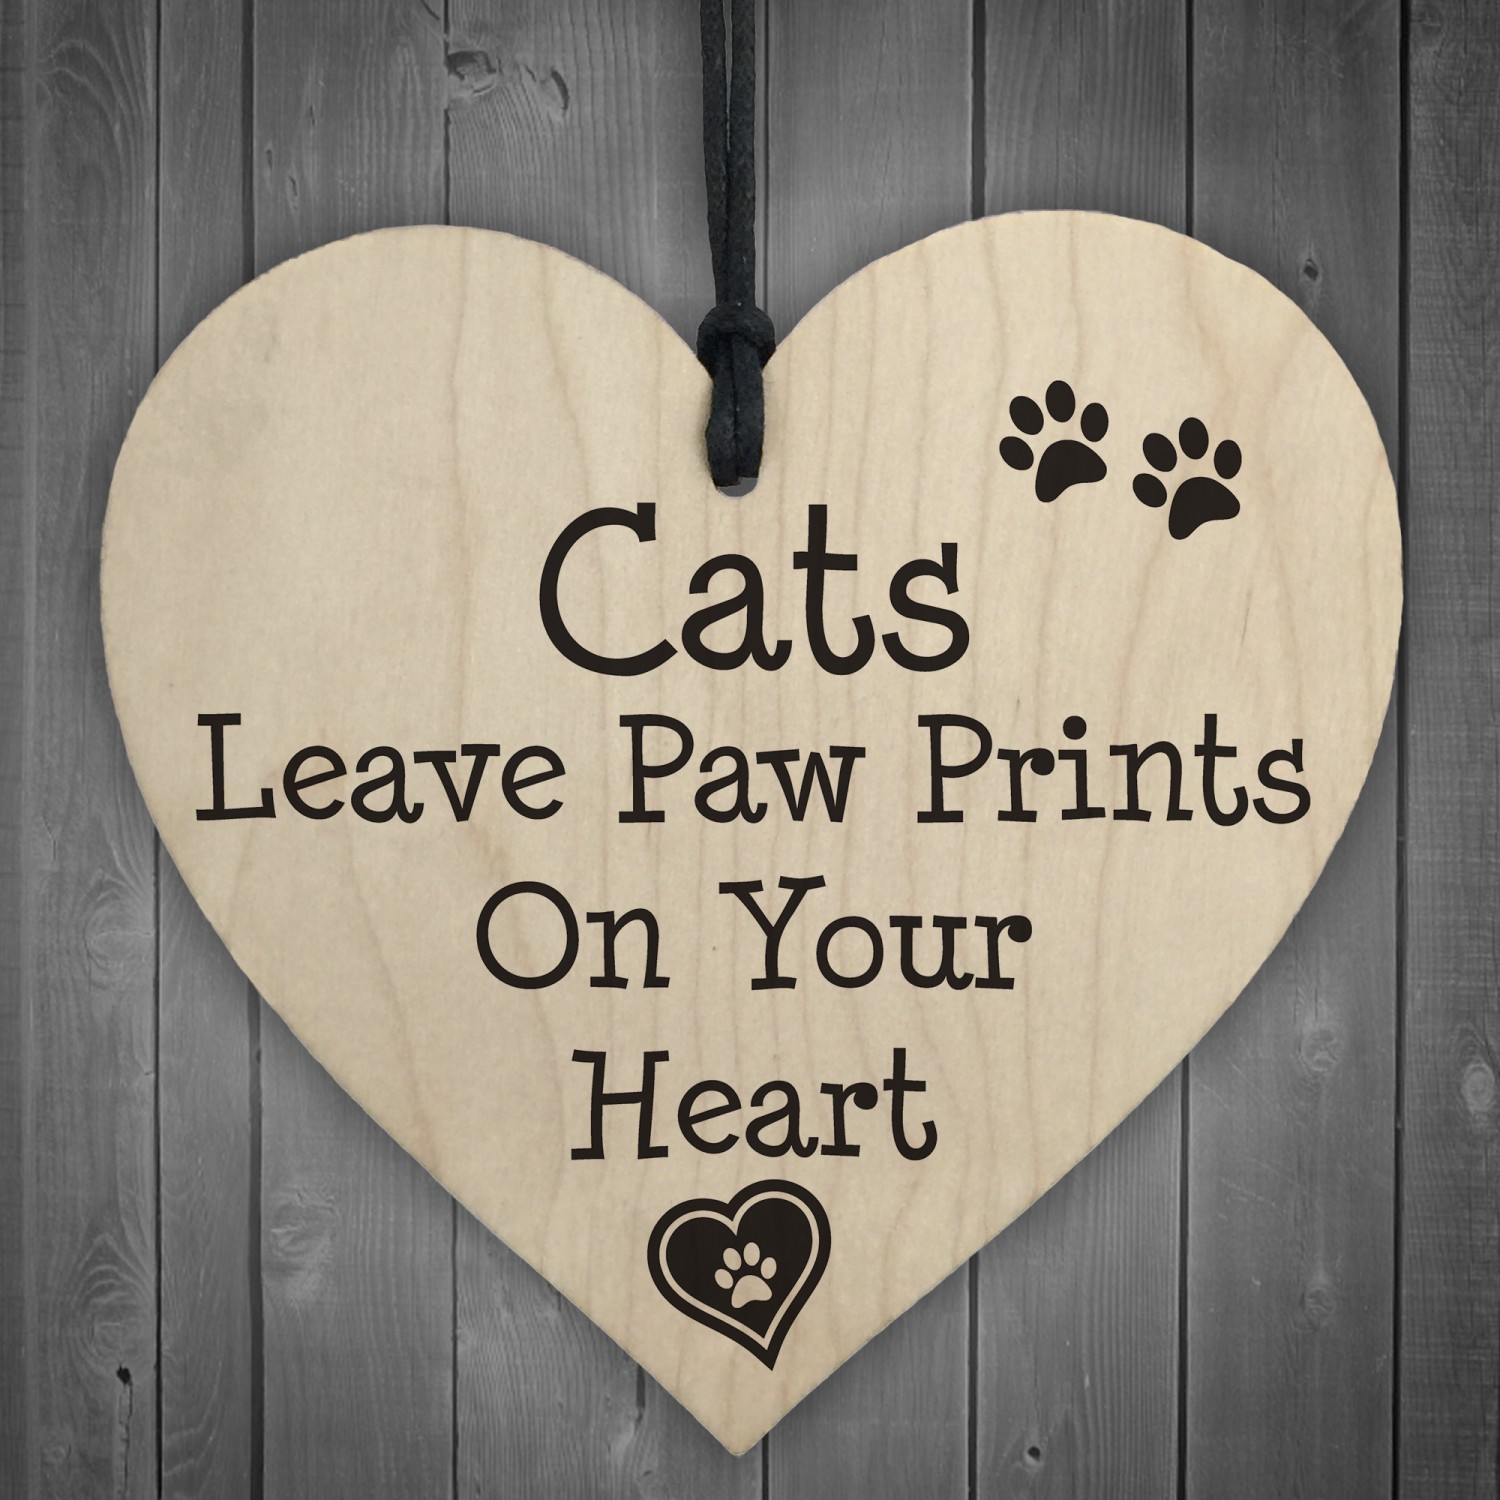 Cat's Leave Paw Prints On The Heart Love My Cat Mirrored Tealight Candle Holder 